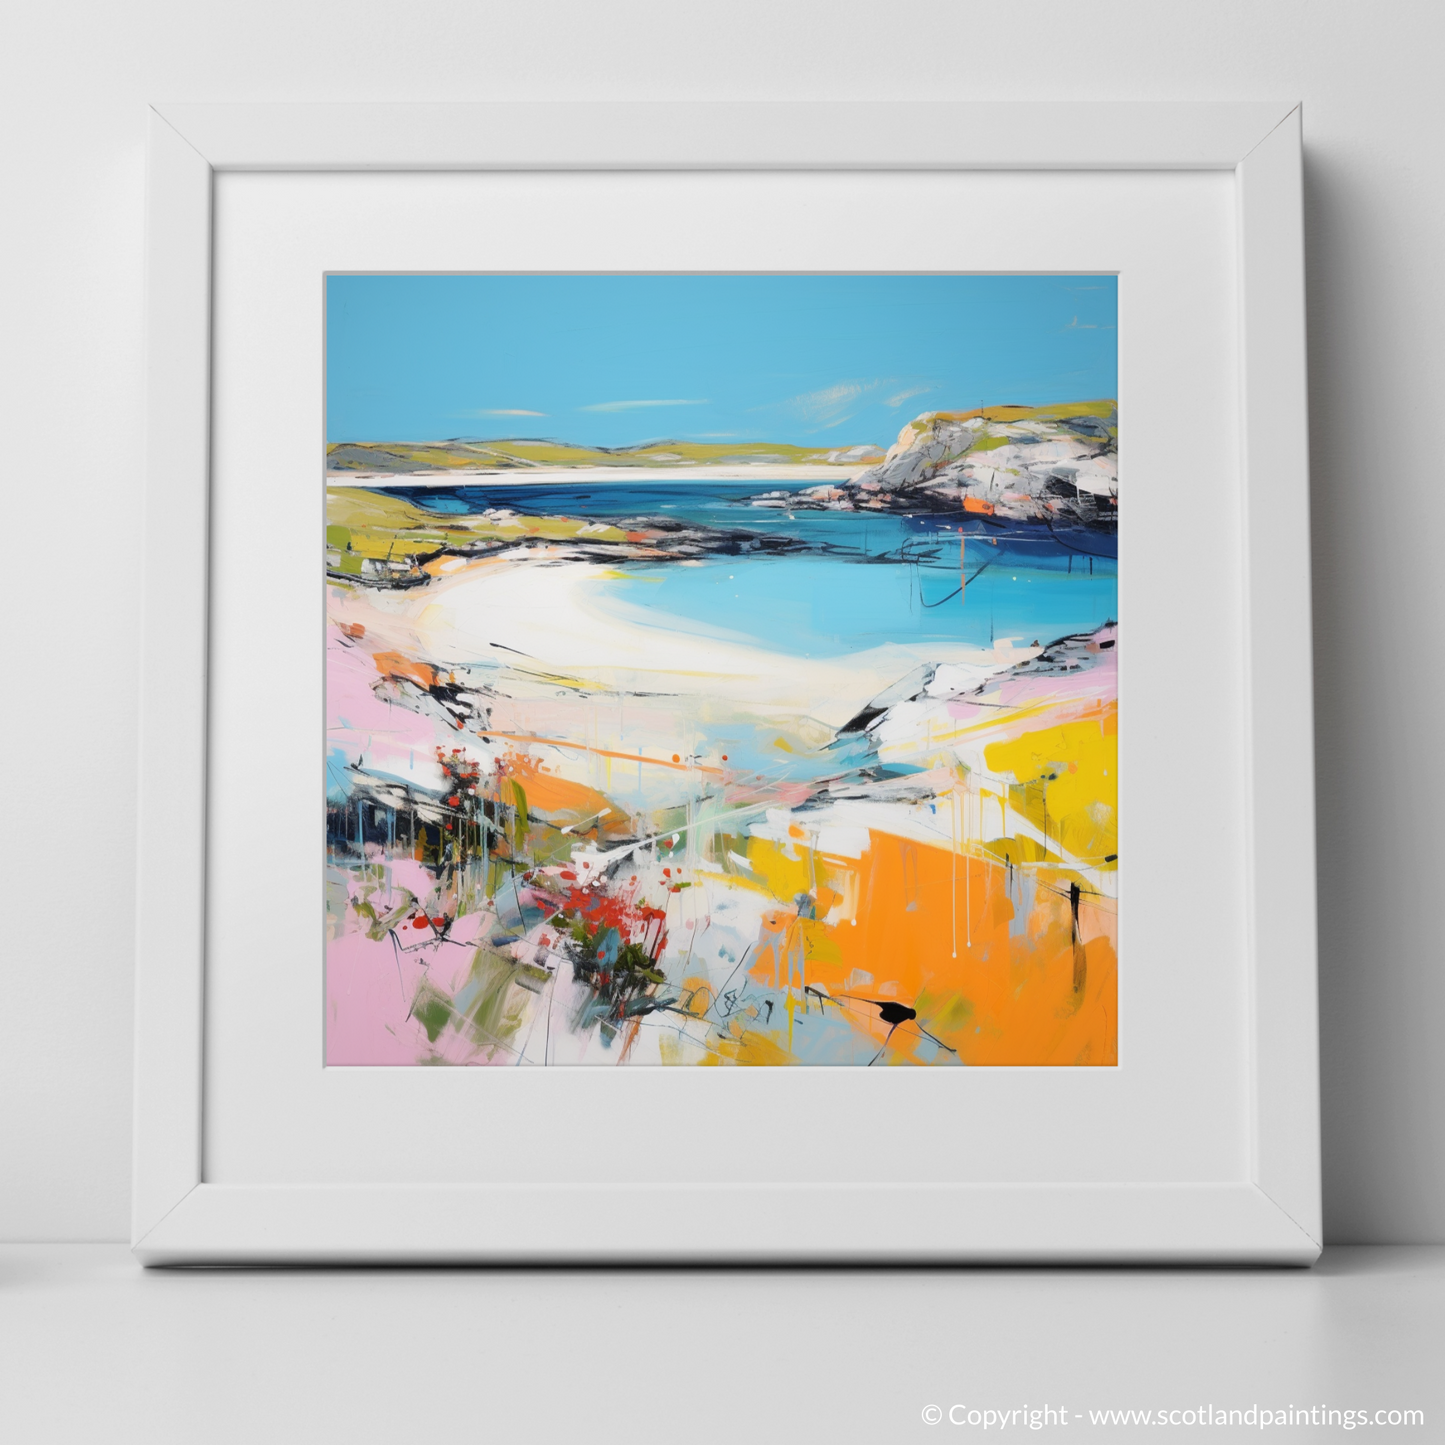 Art Print of Achmelvich Bay, Sutherland in summer with a white frame